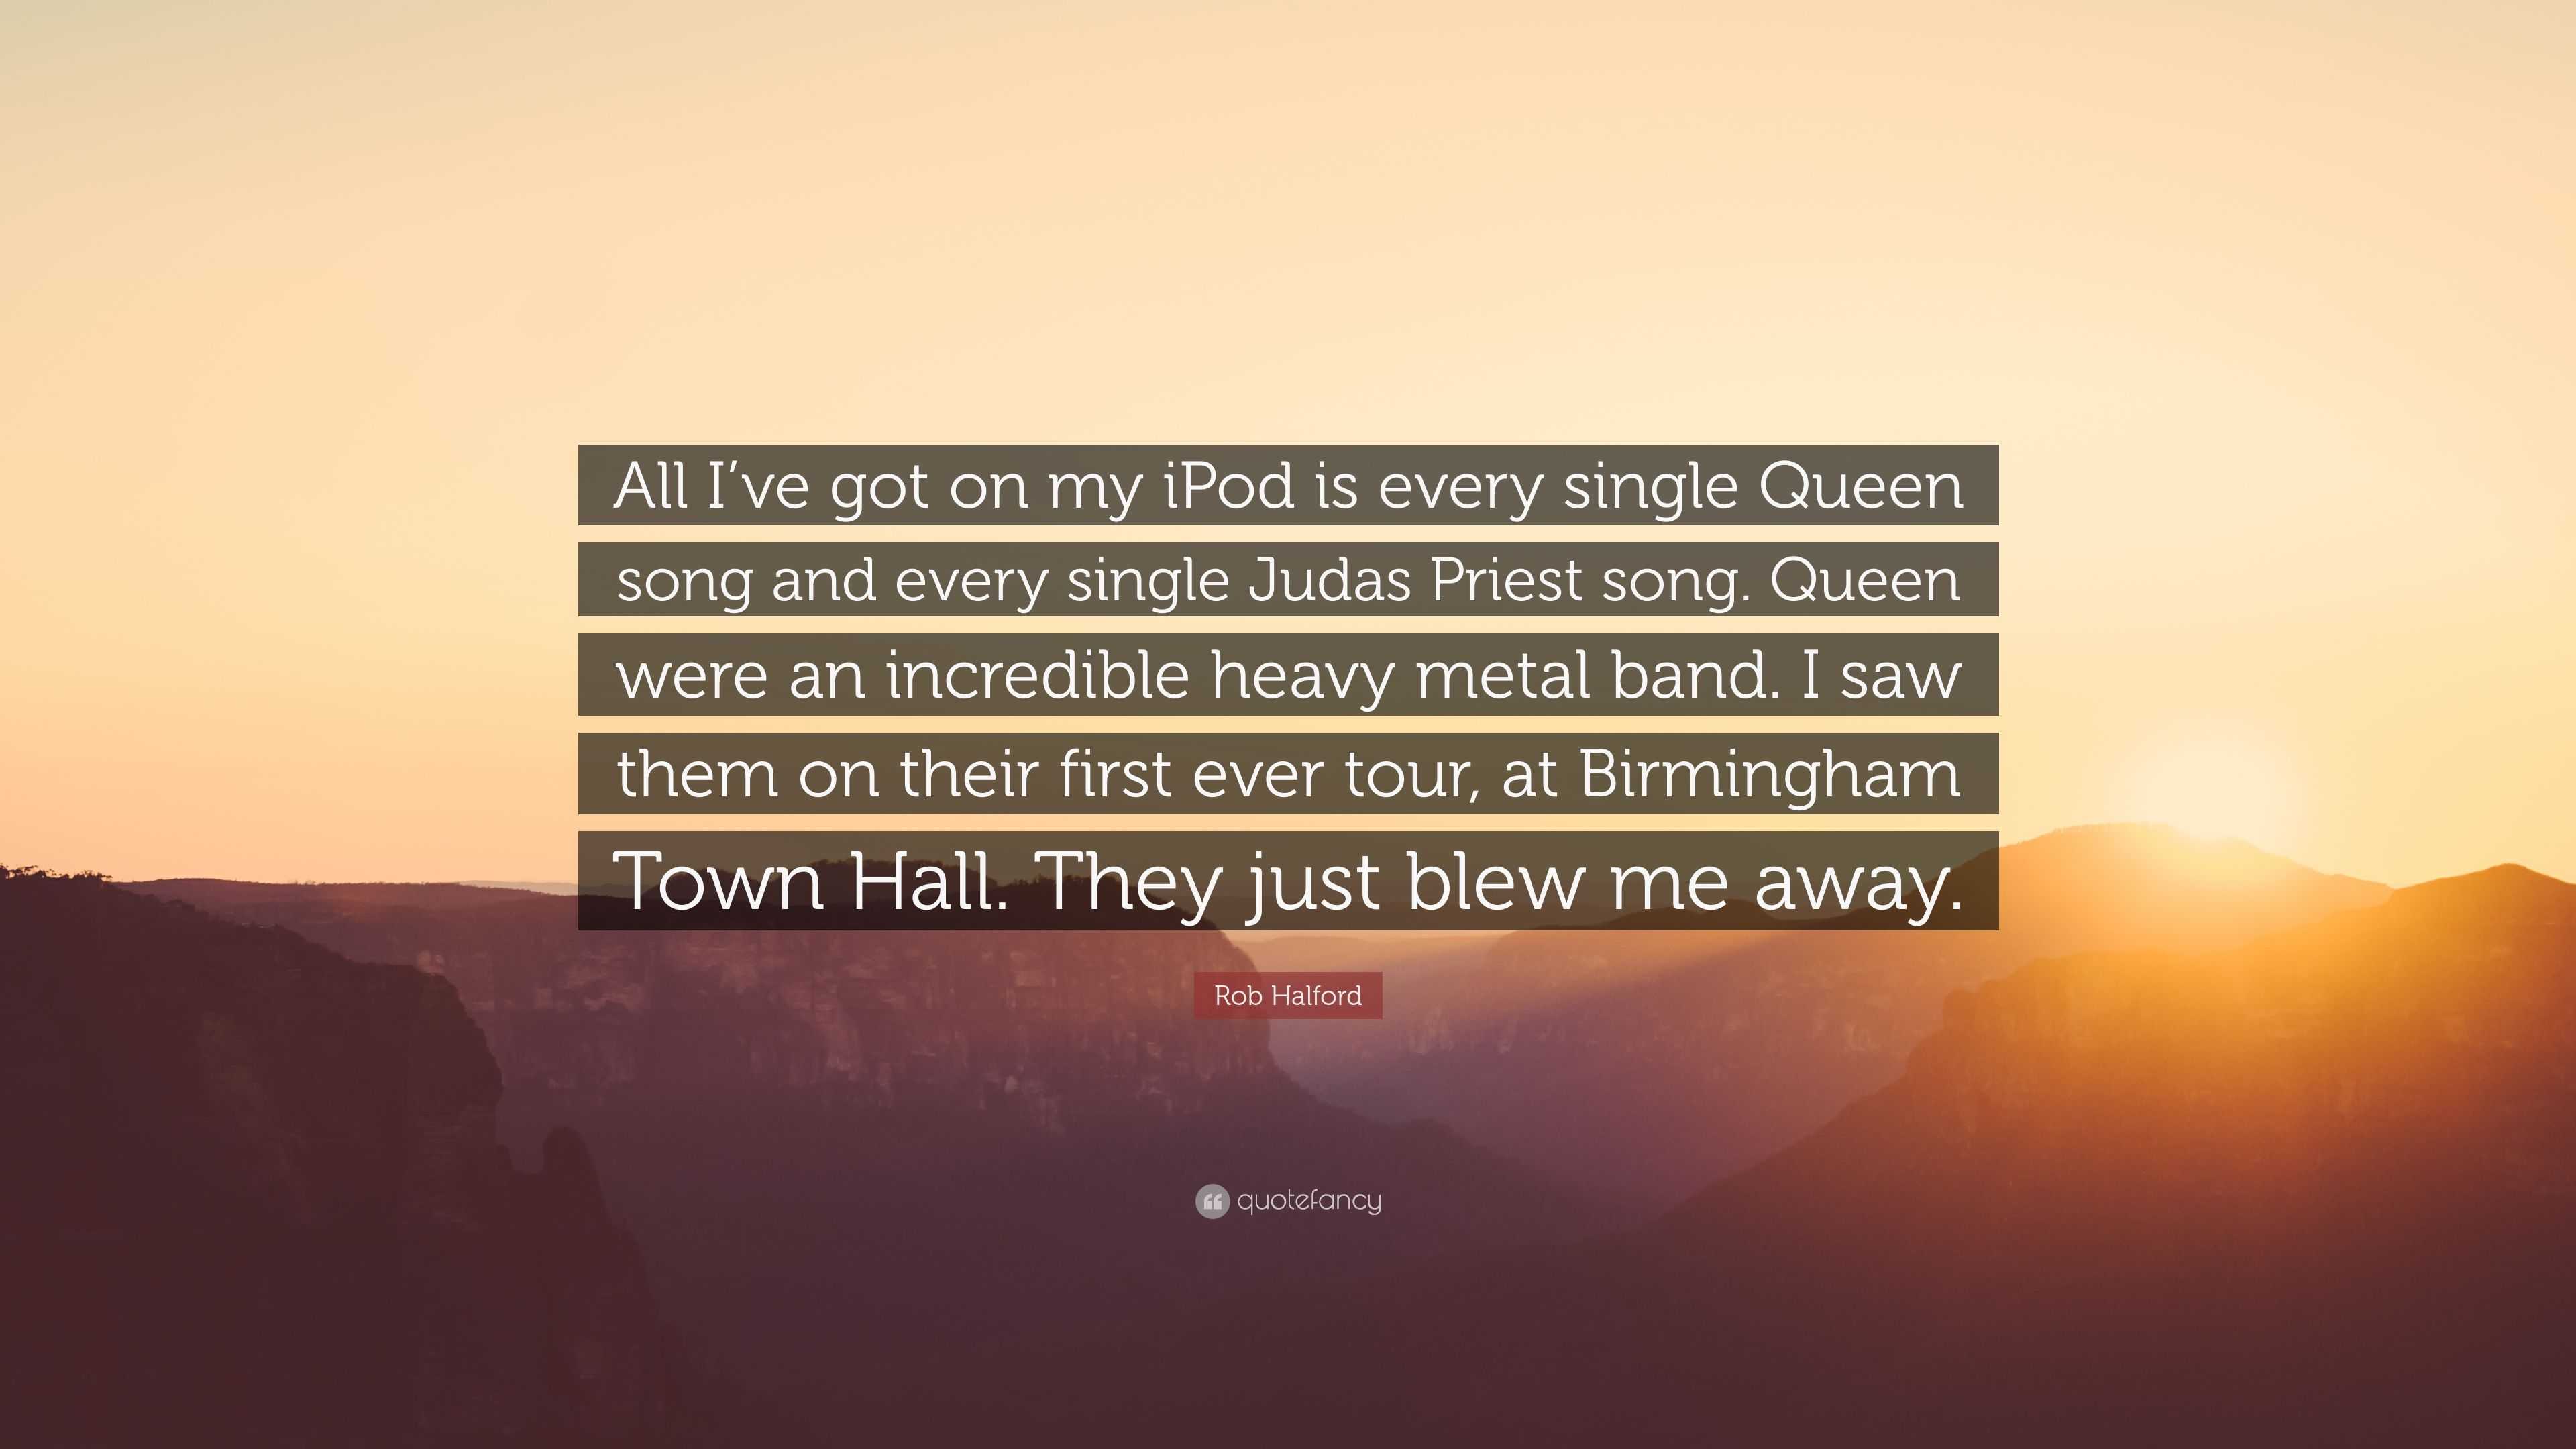 Rob Halford Quote: “All I've got on my iPod is every single Queen